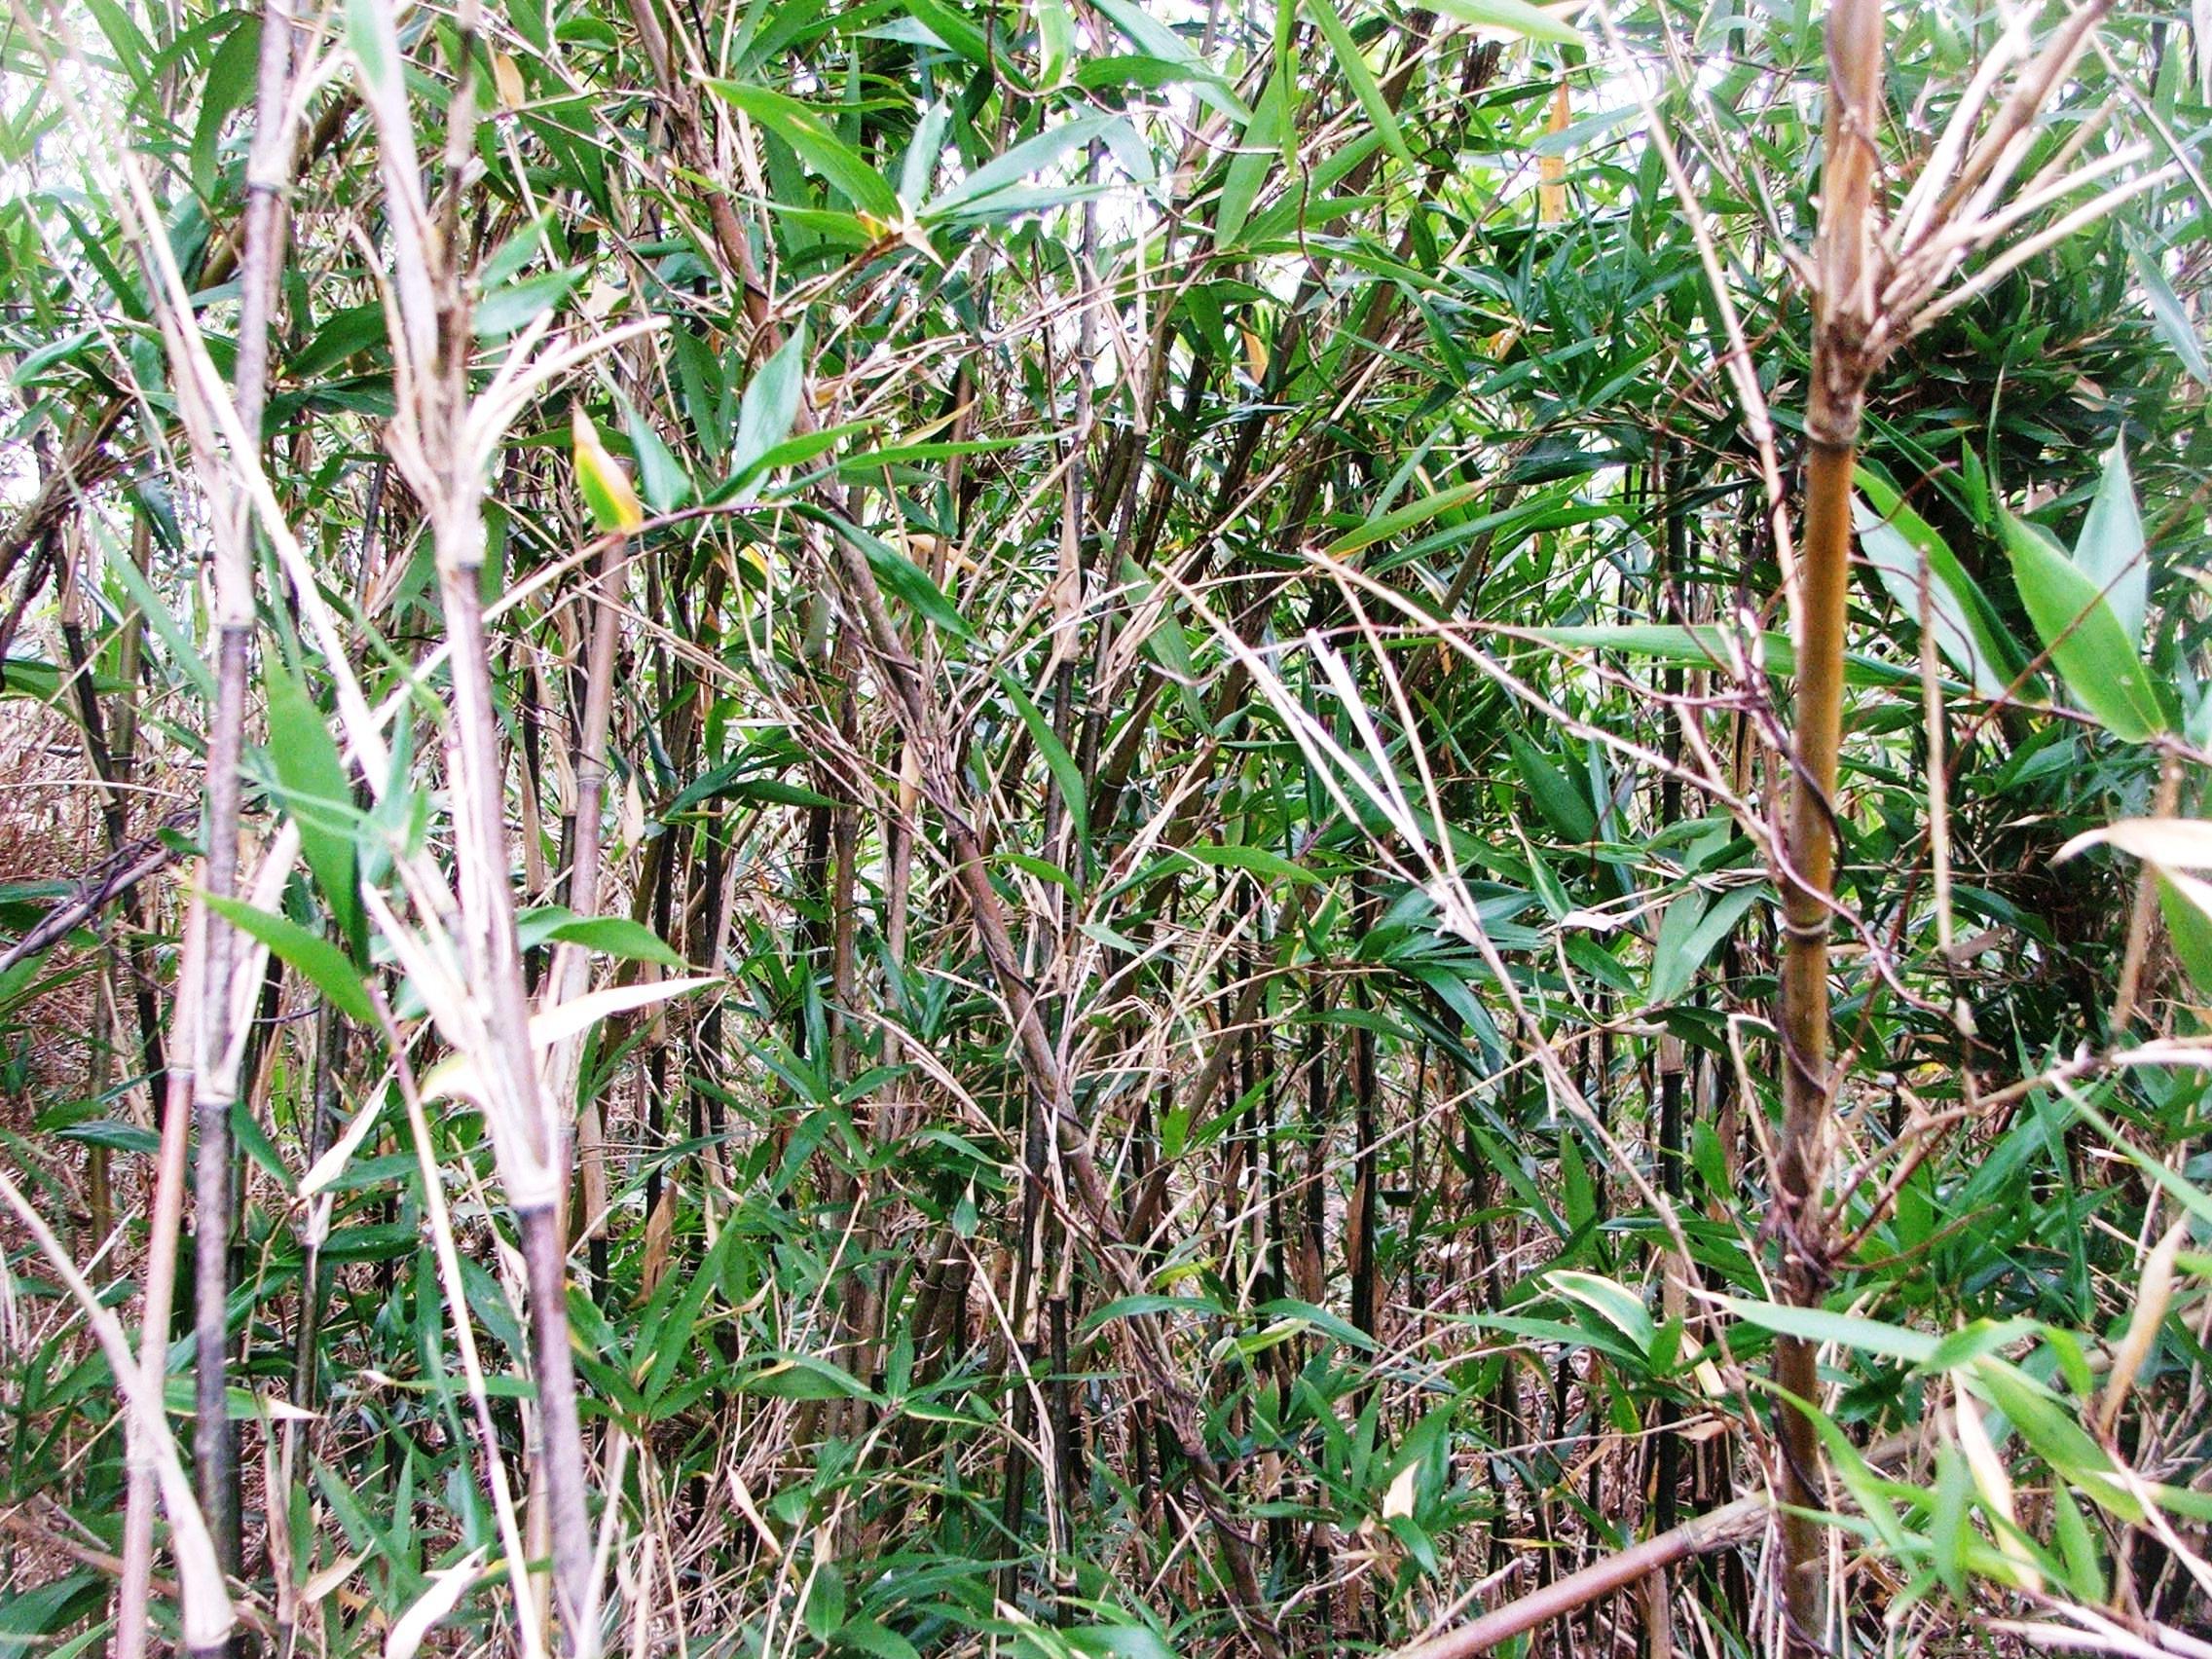 Photo of stand of River Cane